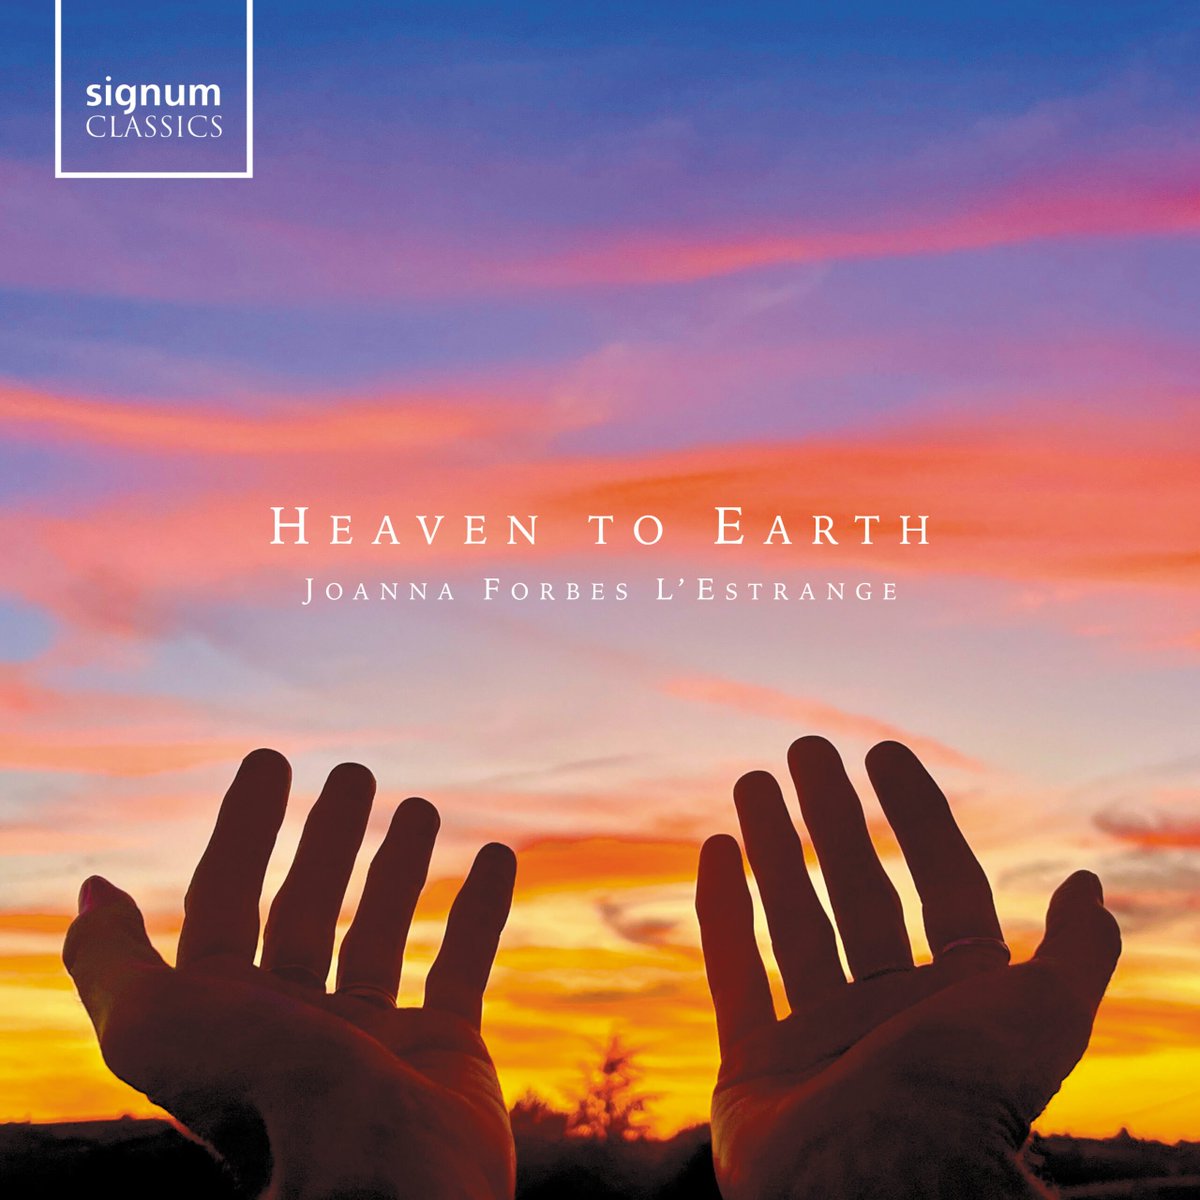 Tune into @richardallinson's show on @ScalaRadio now to hear a track from 'Heaven to Earth', a collection of songs from @JoForbesLE (feat. @Andreana_chan @benparrymusic and @LDNVoices) released on @SignumRecords last month 🚗 planetradio.co.uk/scala-radio/pl…